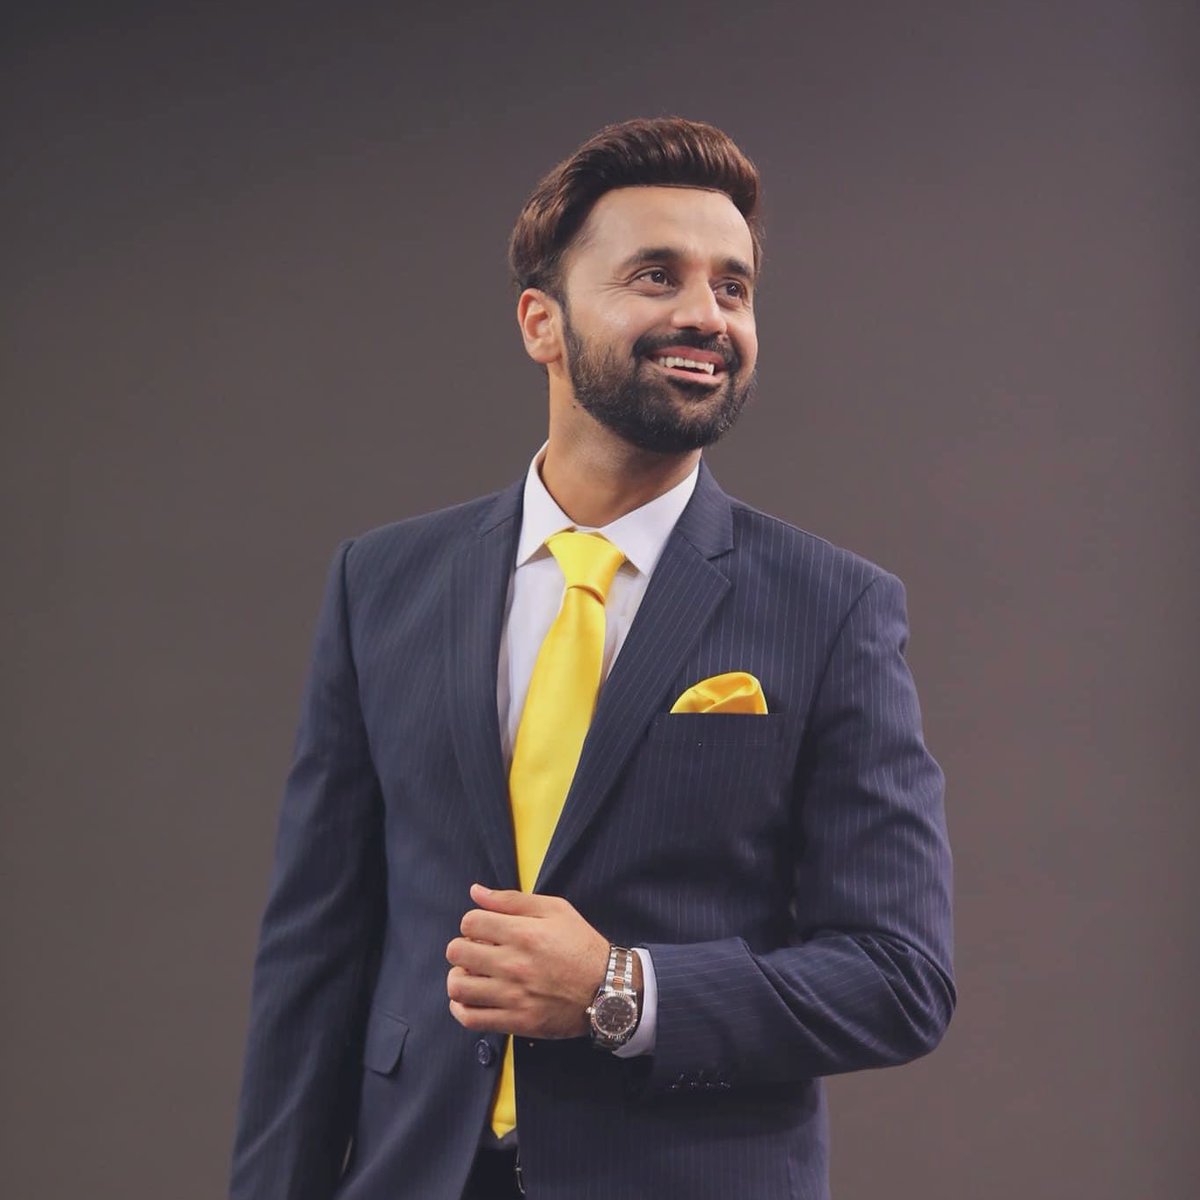 All love and support..That is PURE is what he deserves❤️ #WaseemBadami